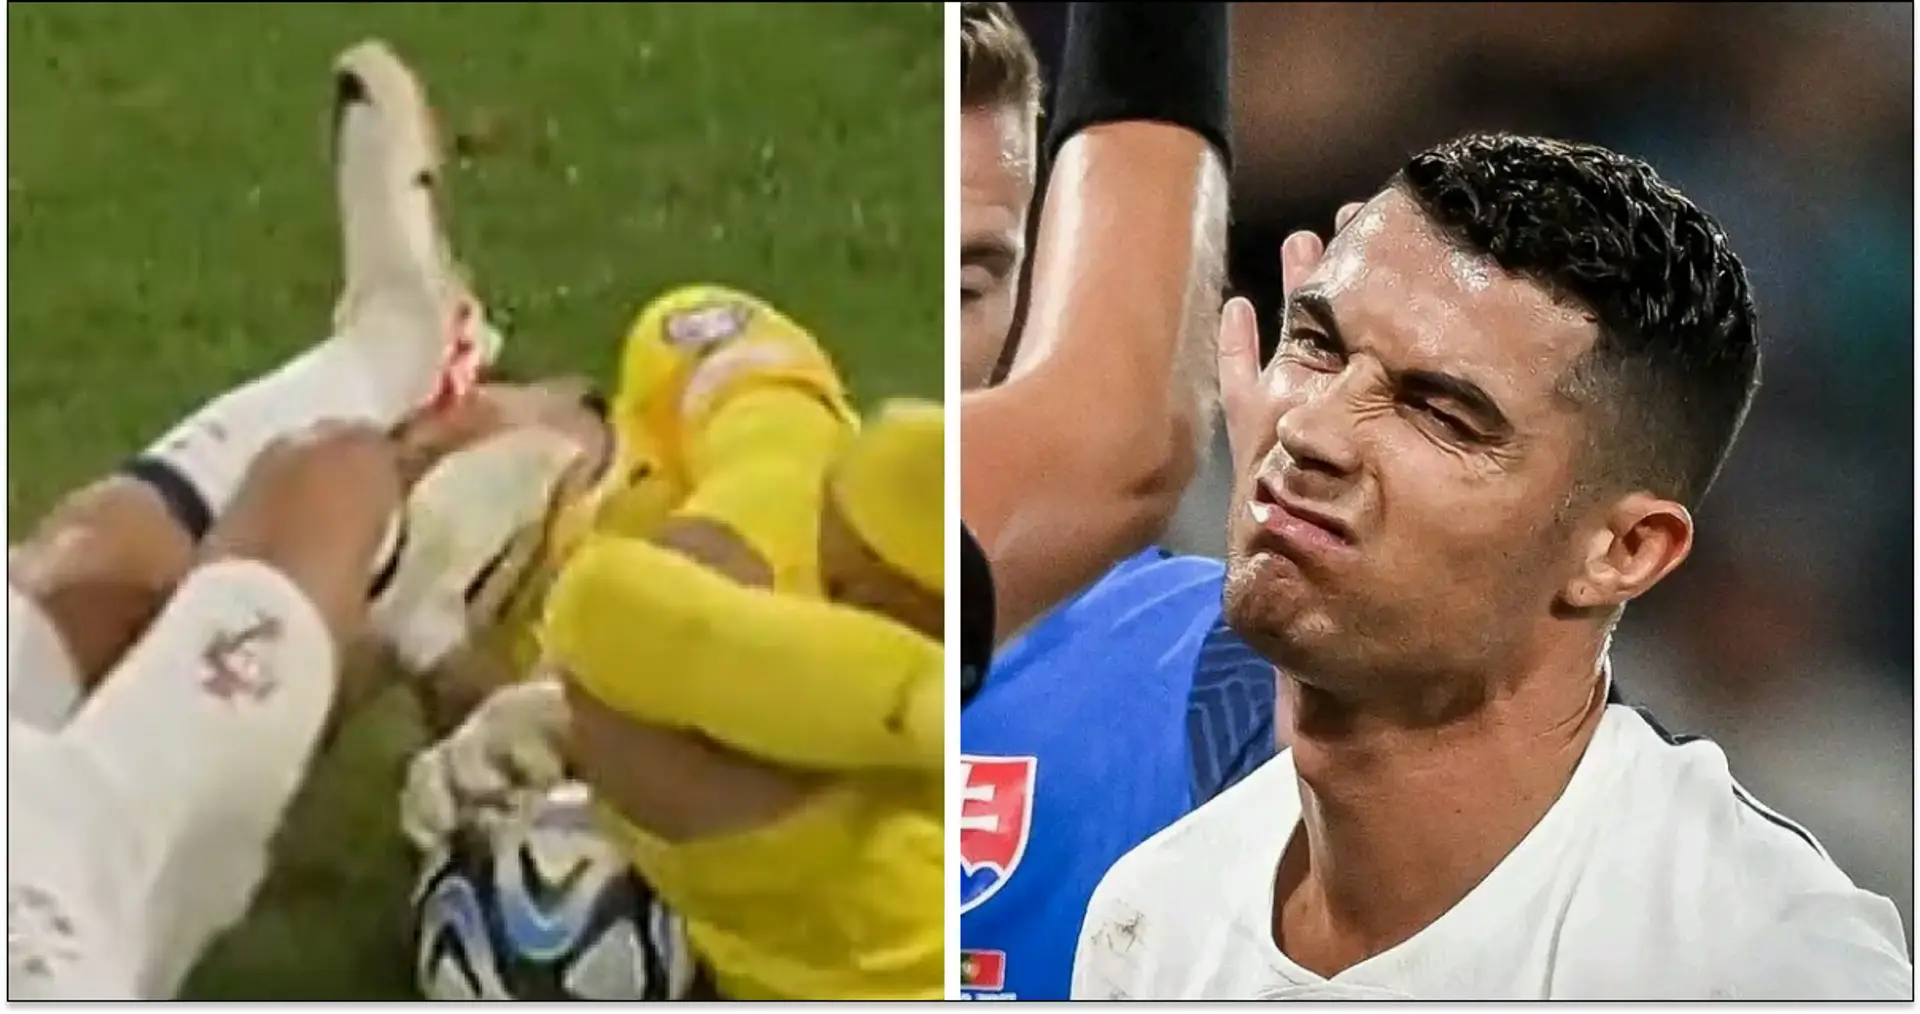 Cristiano Ronaldo scrapes studs into former United teammate's face, somehow avoids red card